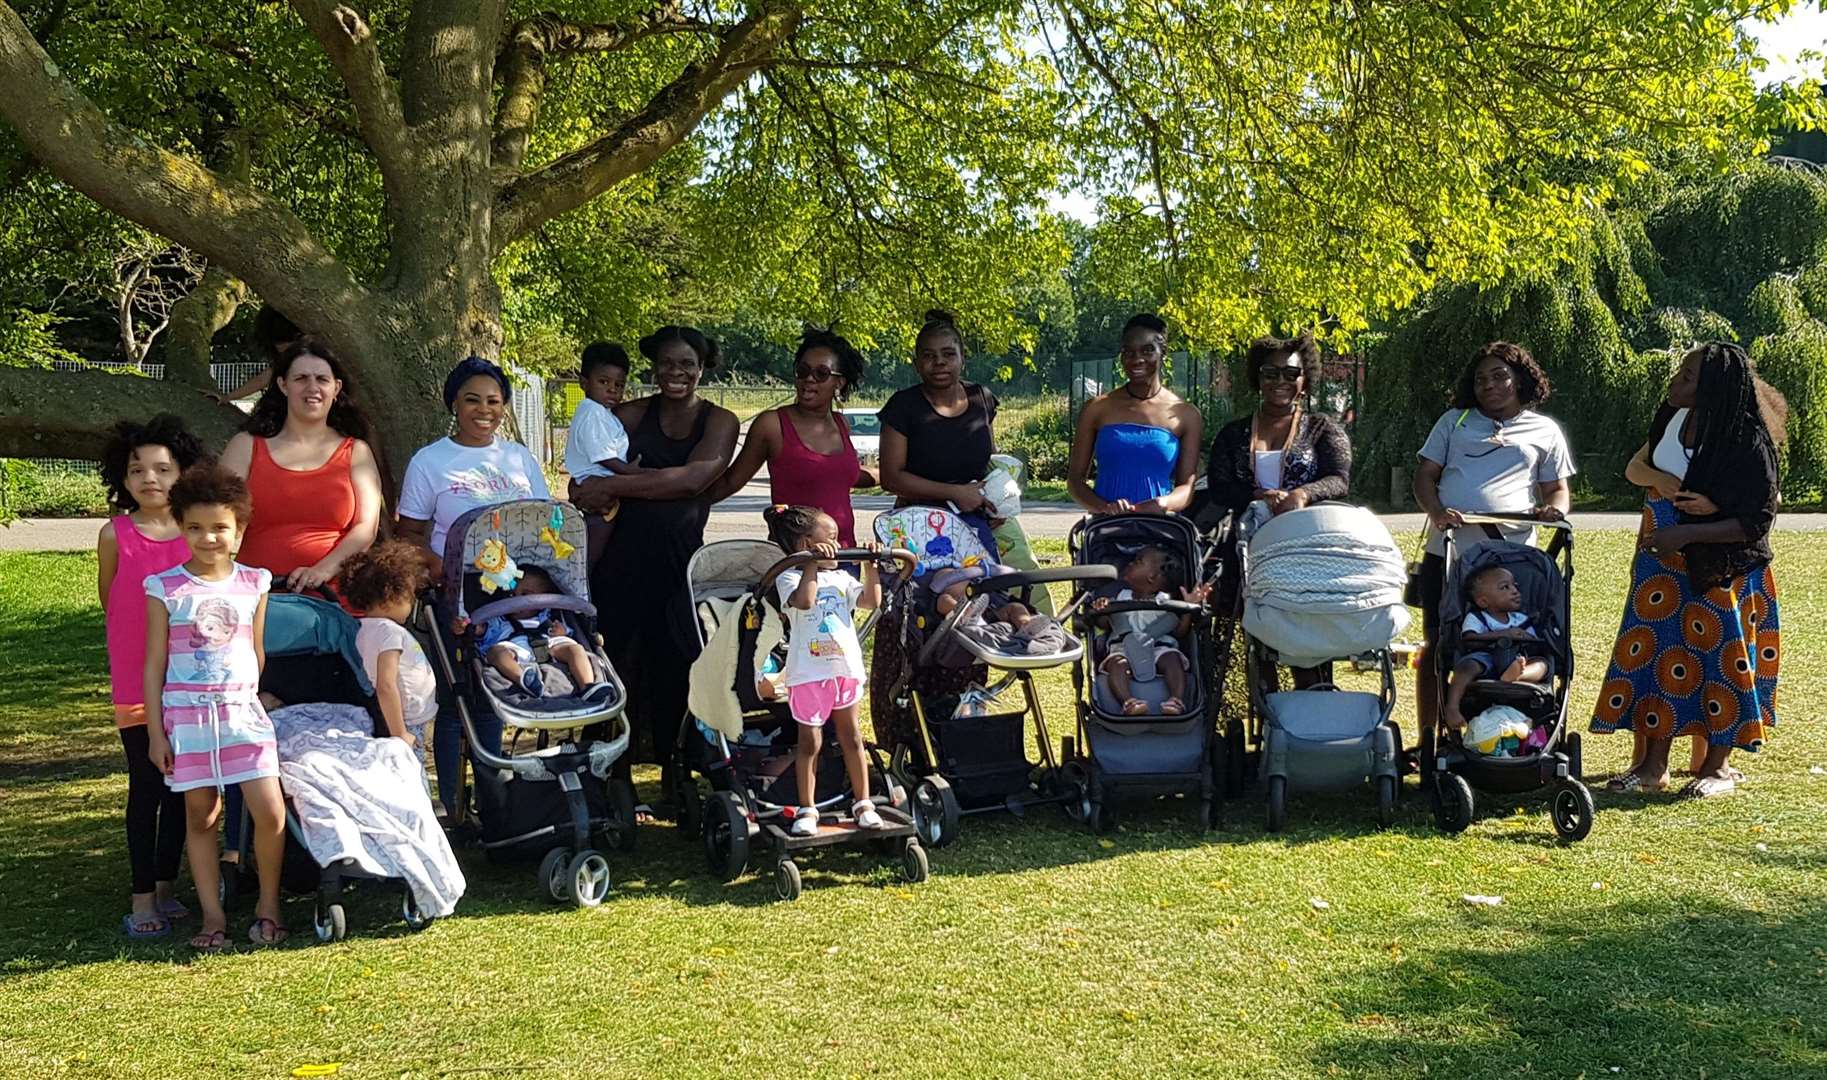 Mummy's Linkup members join together for a picnic day pre-Covid. Picture: Omowunmi Babalola